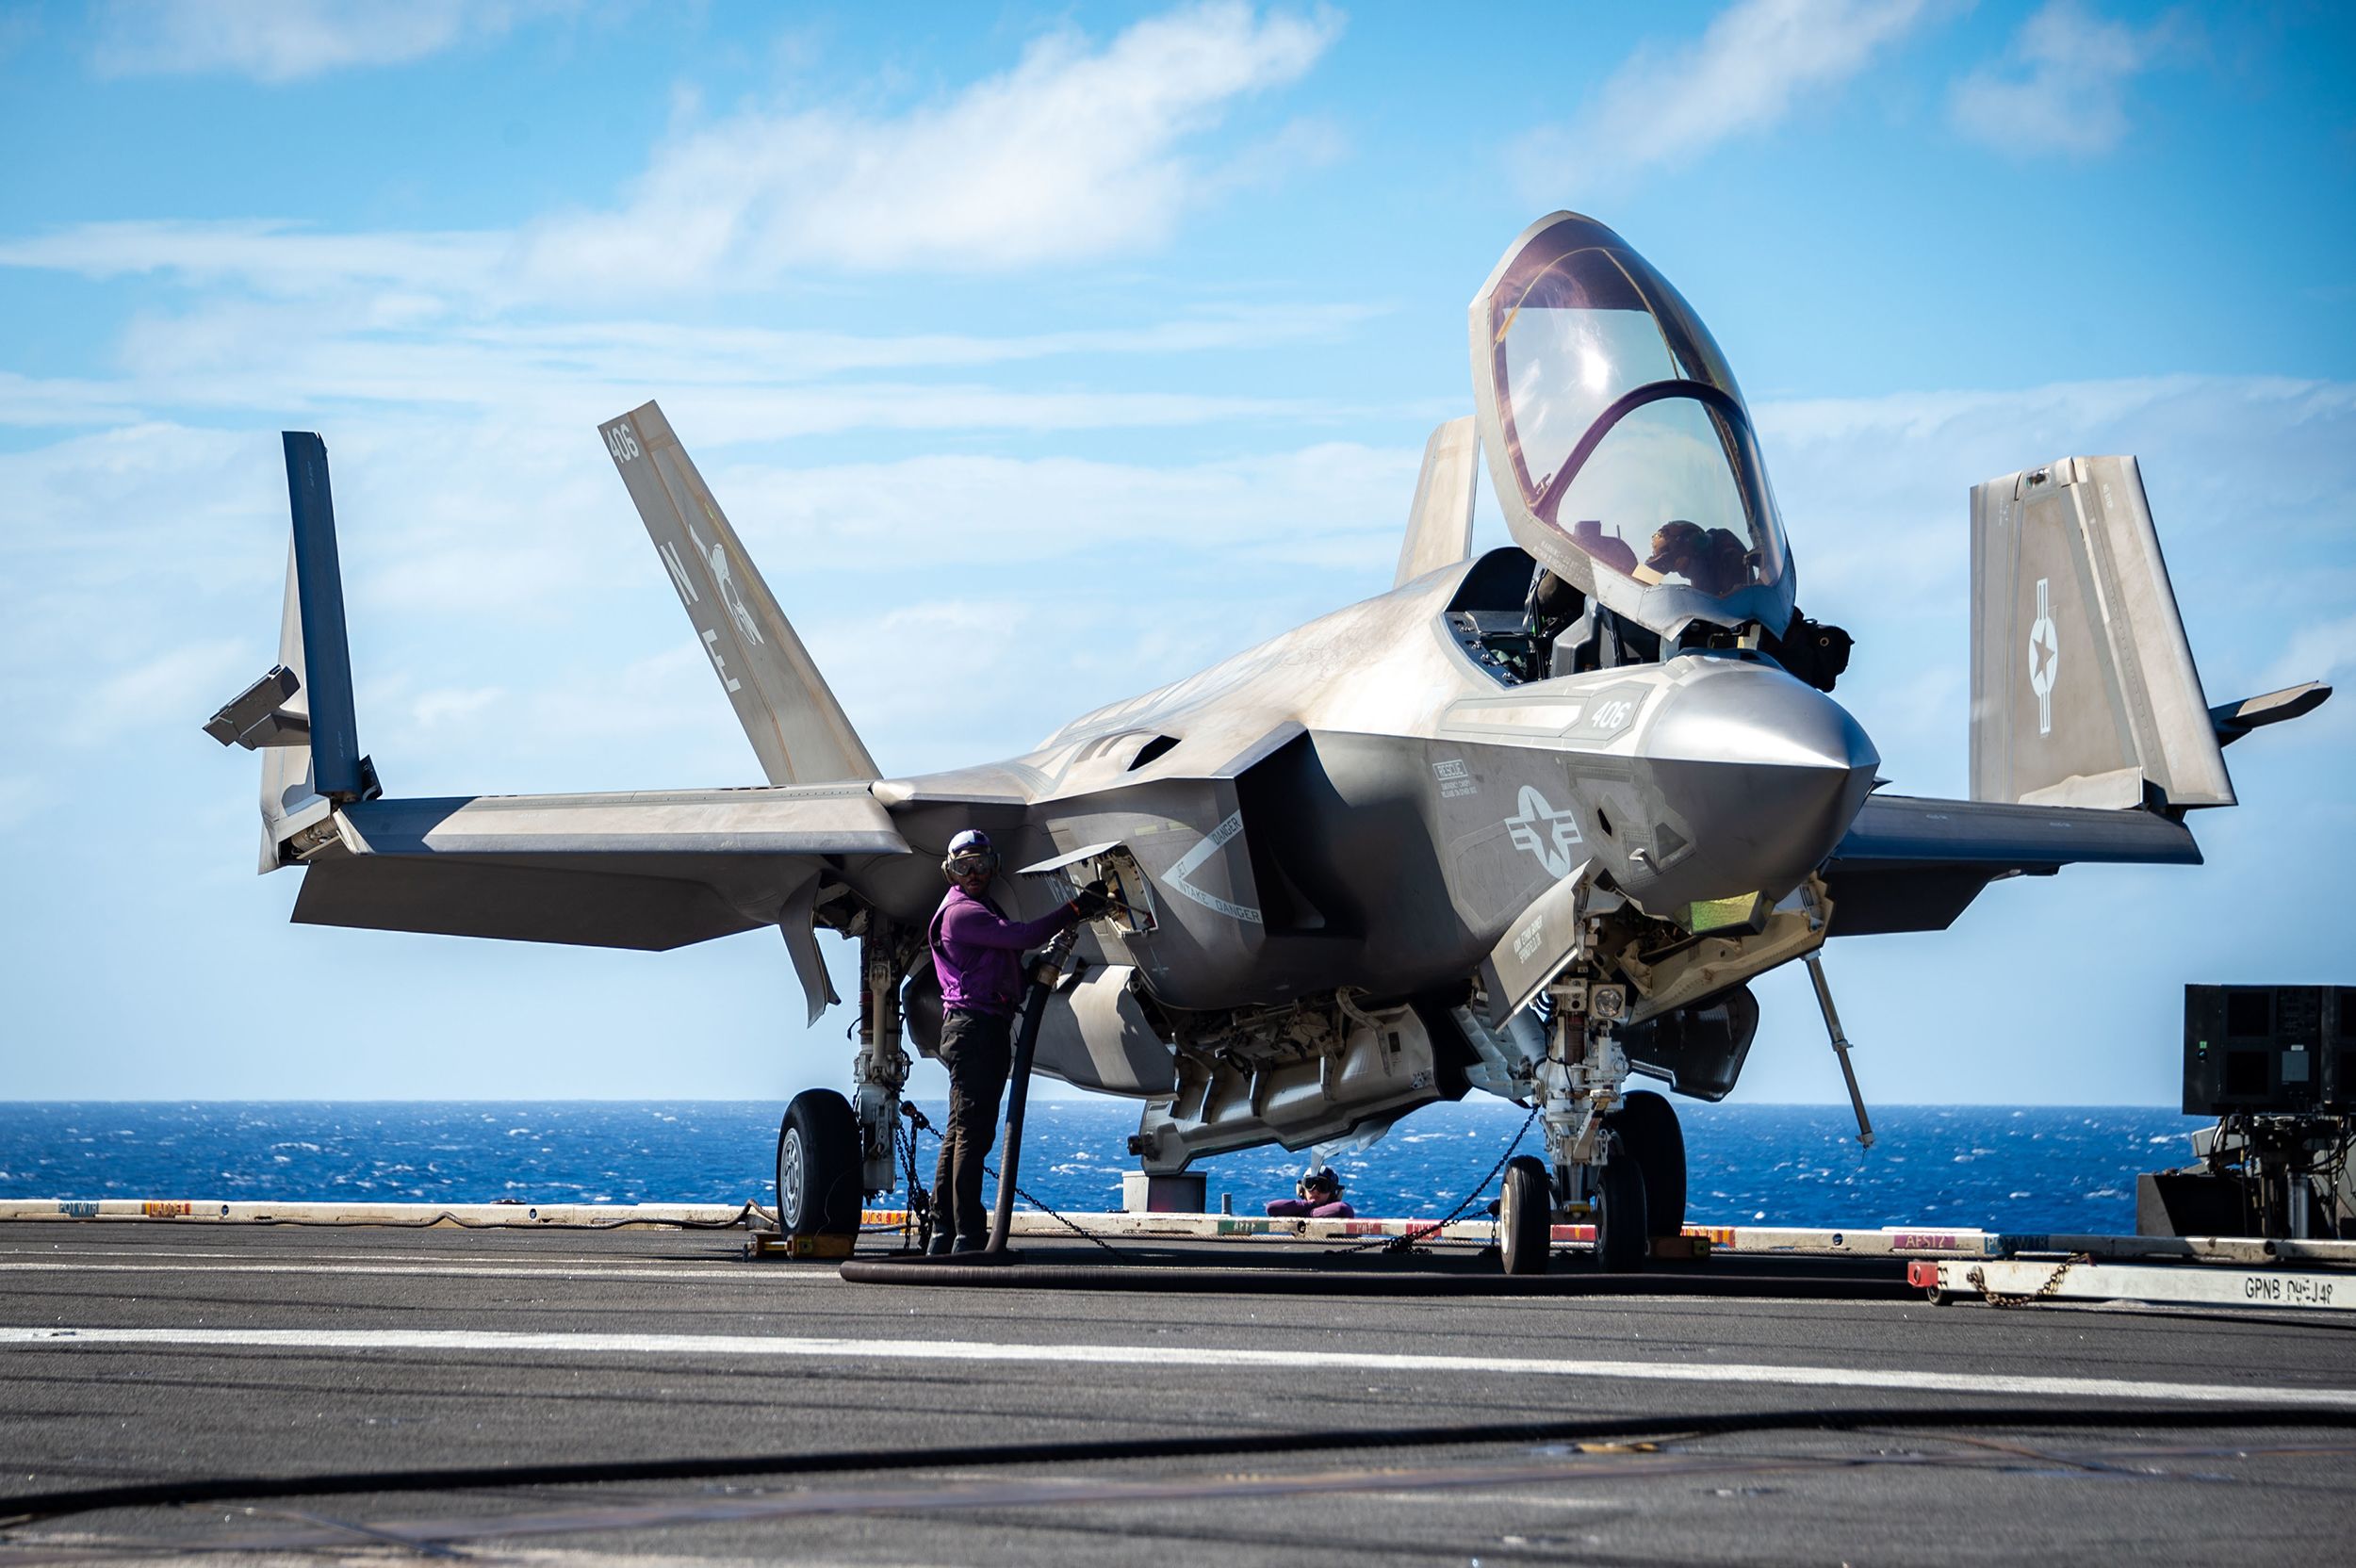 The F-35 incorporates advanced avionics and sensor systems, including an active electronically scanned array (AESA) radar, electro-optical targeting system (EOTS), and distributed aperture system (DAS) for situational awareness.